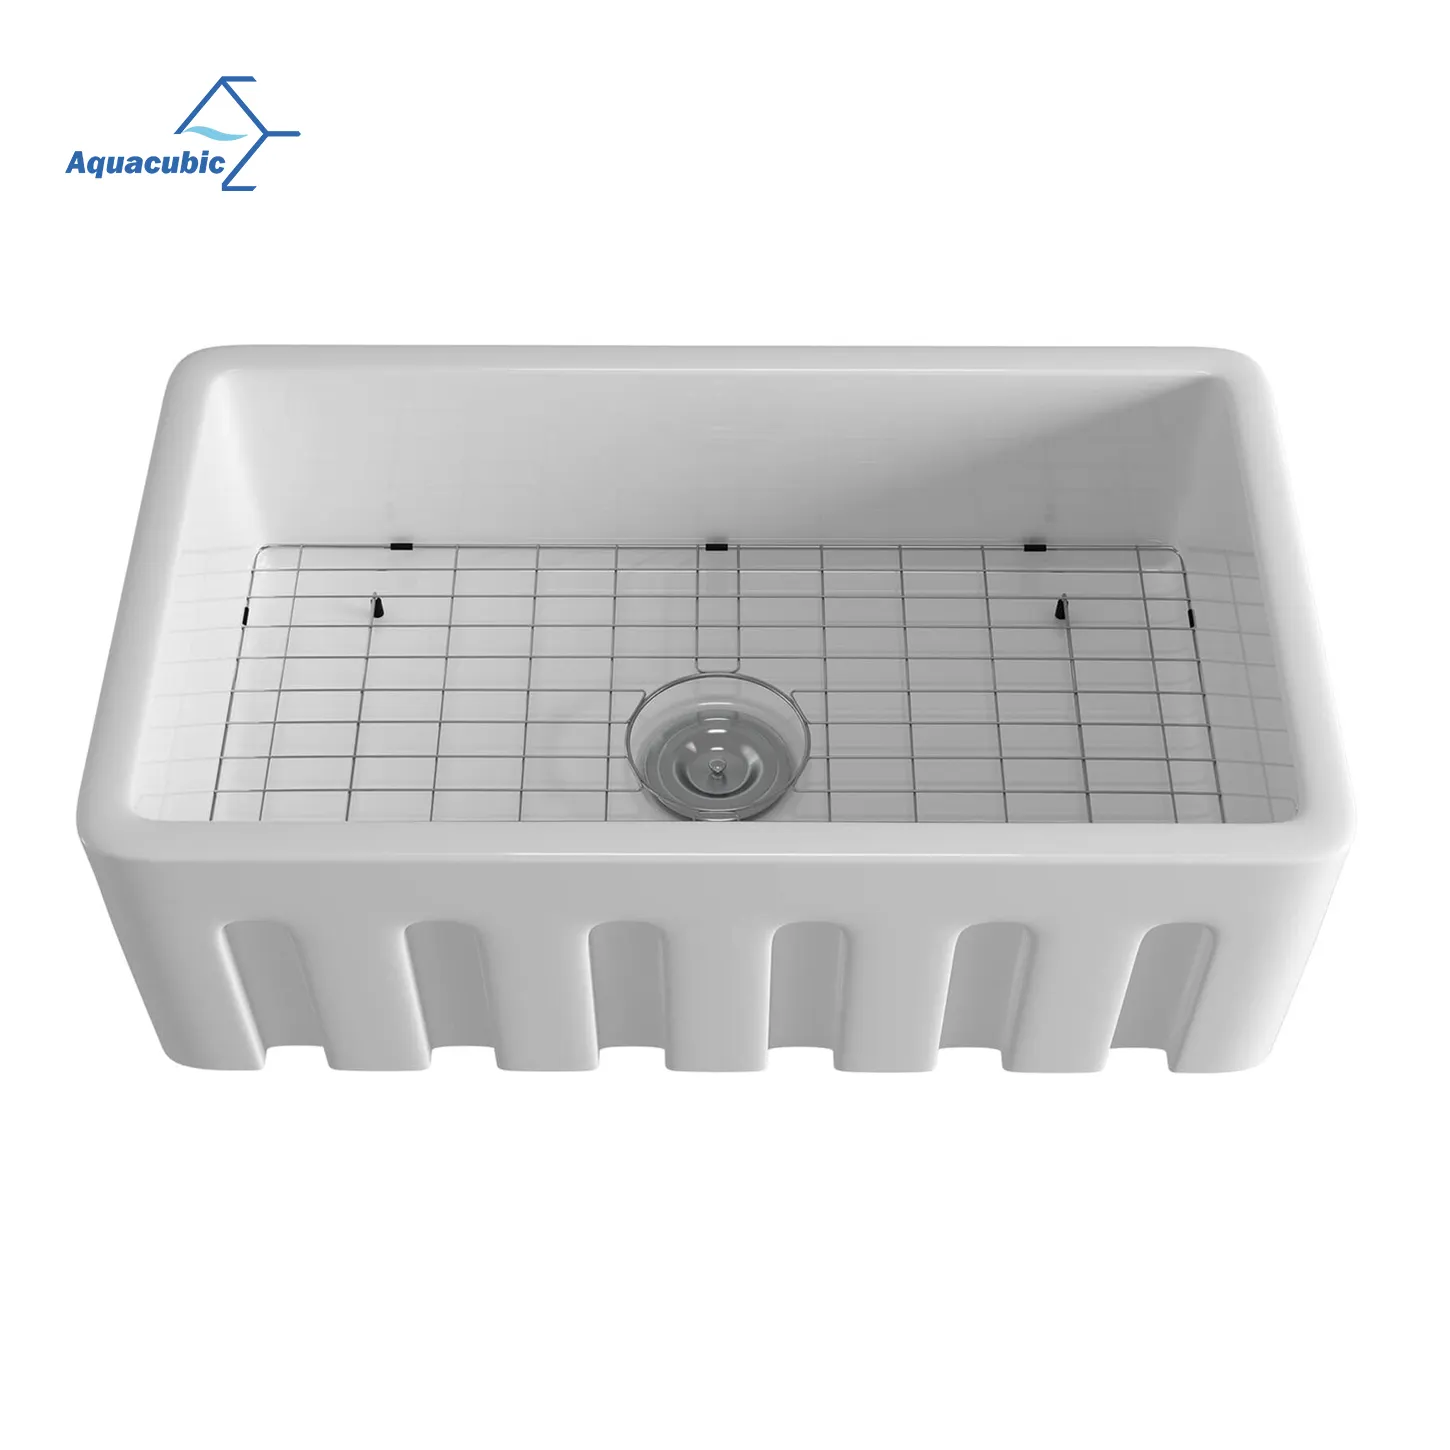 Aquacubic Single Bowl 33 inch Ceramic Kitchen Sink White Reversible Sink with Bottom Grid and Basket Strainer In Stock USA